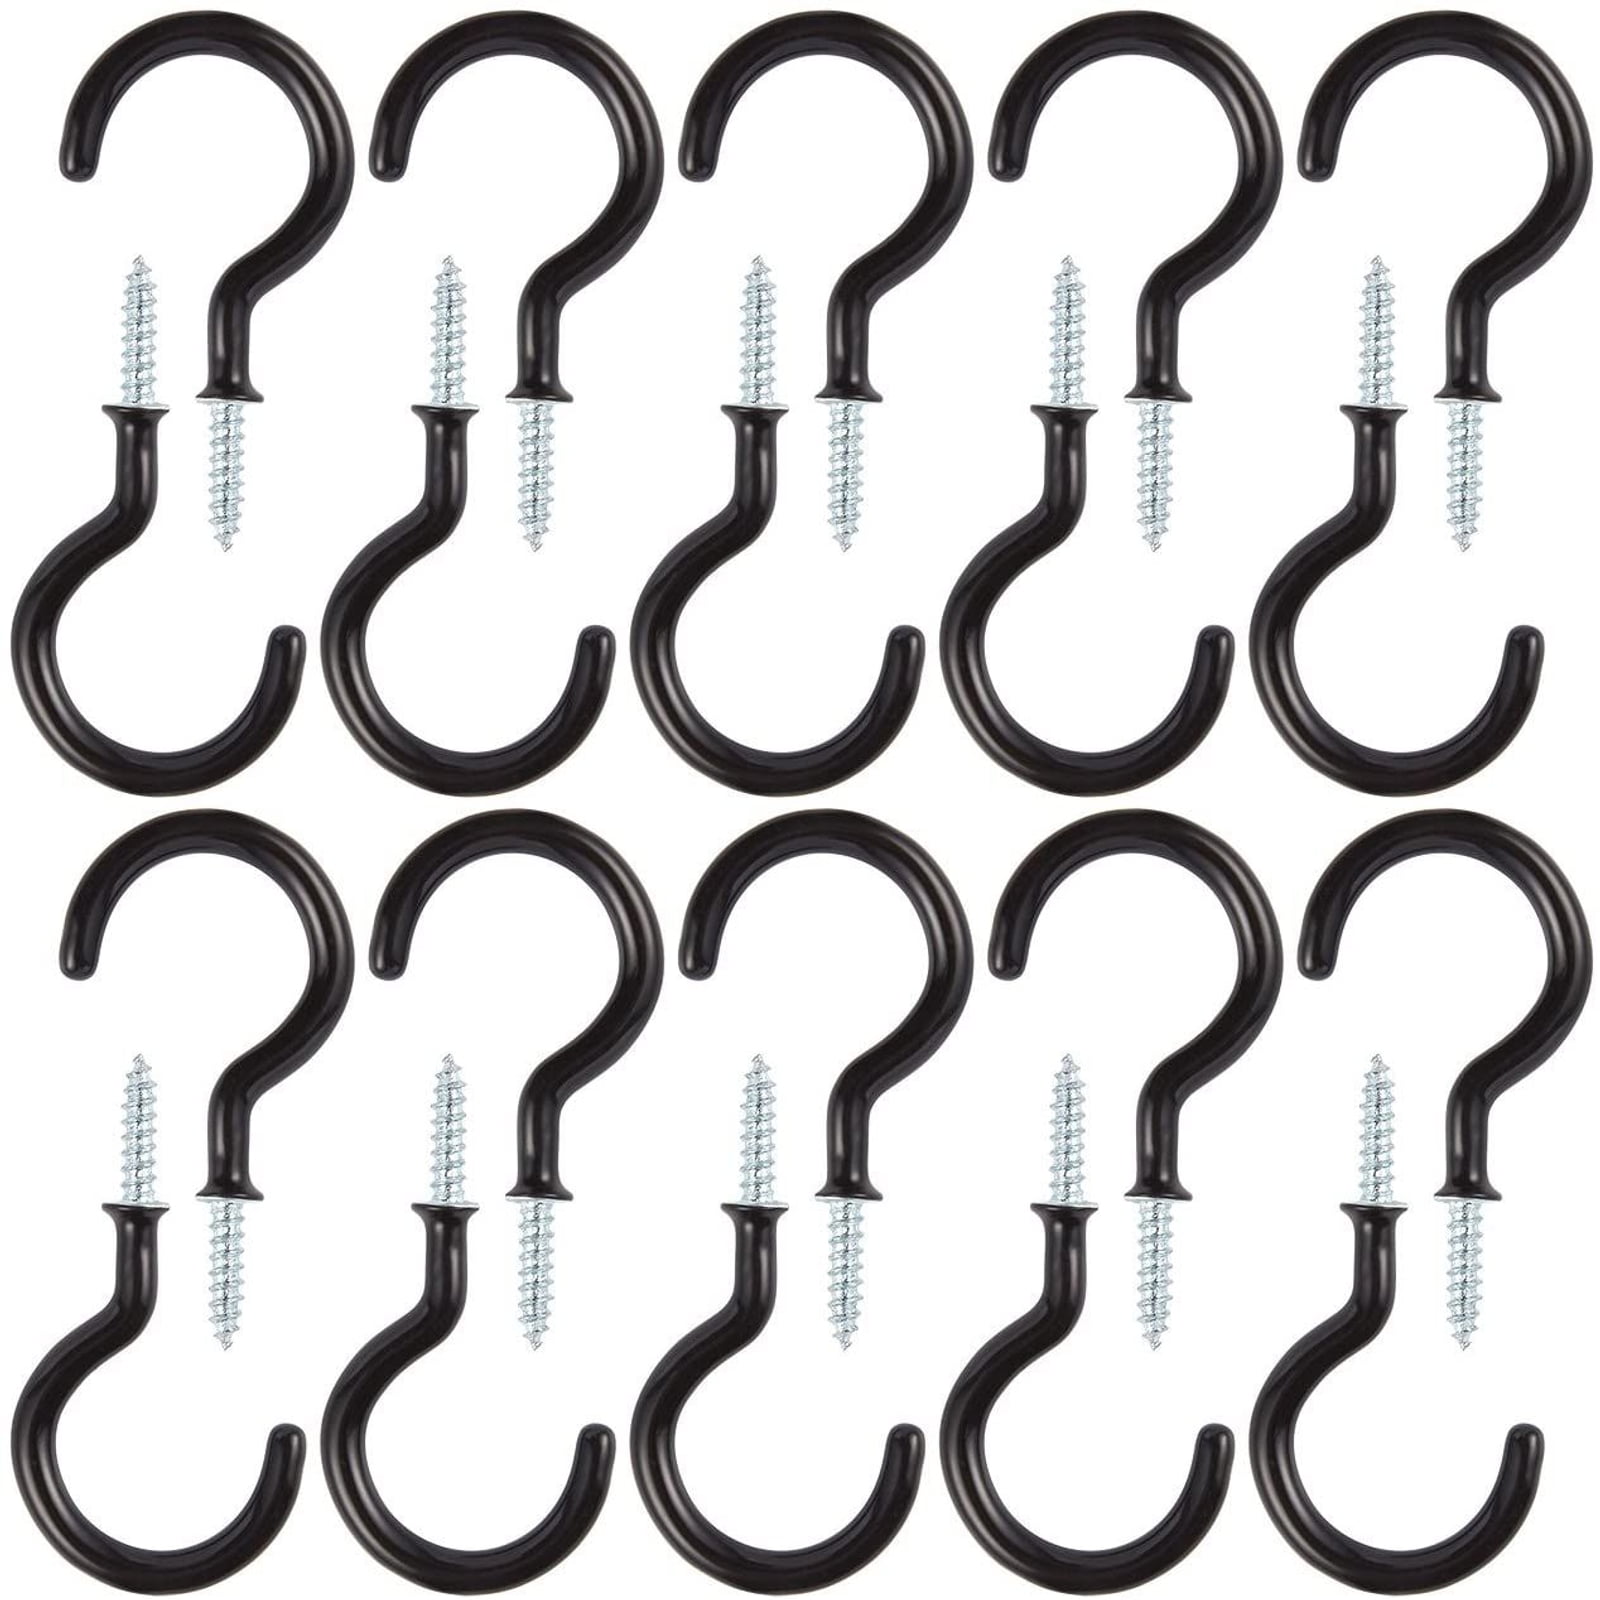 20 PCE STORAGE HOOKS SCREWS HOME SHED RUBBER COATING ASSORTED S994116 